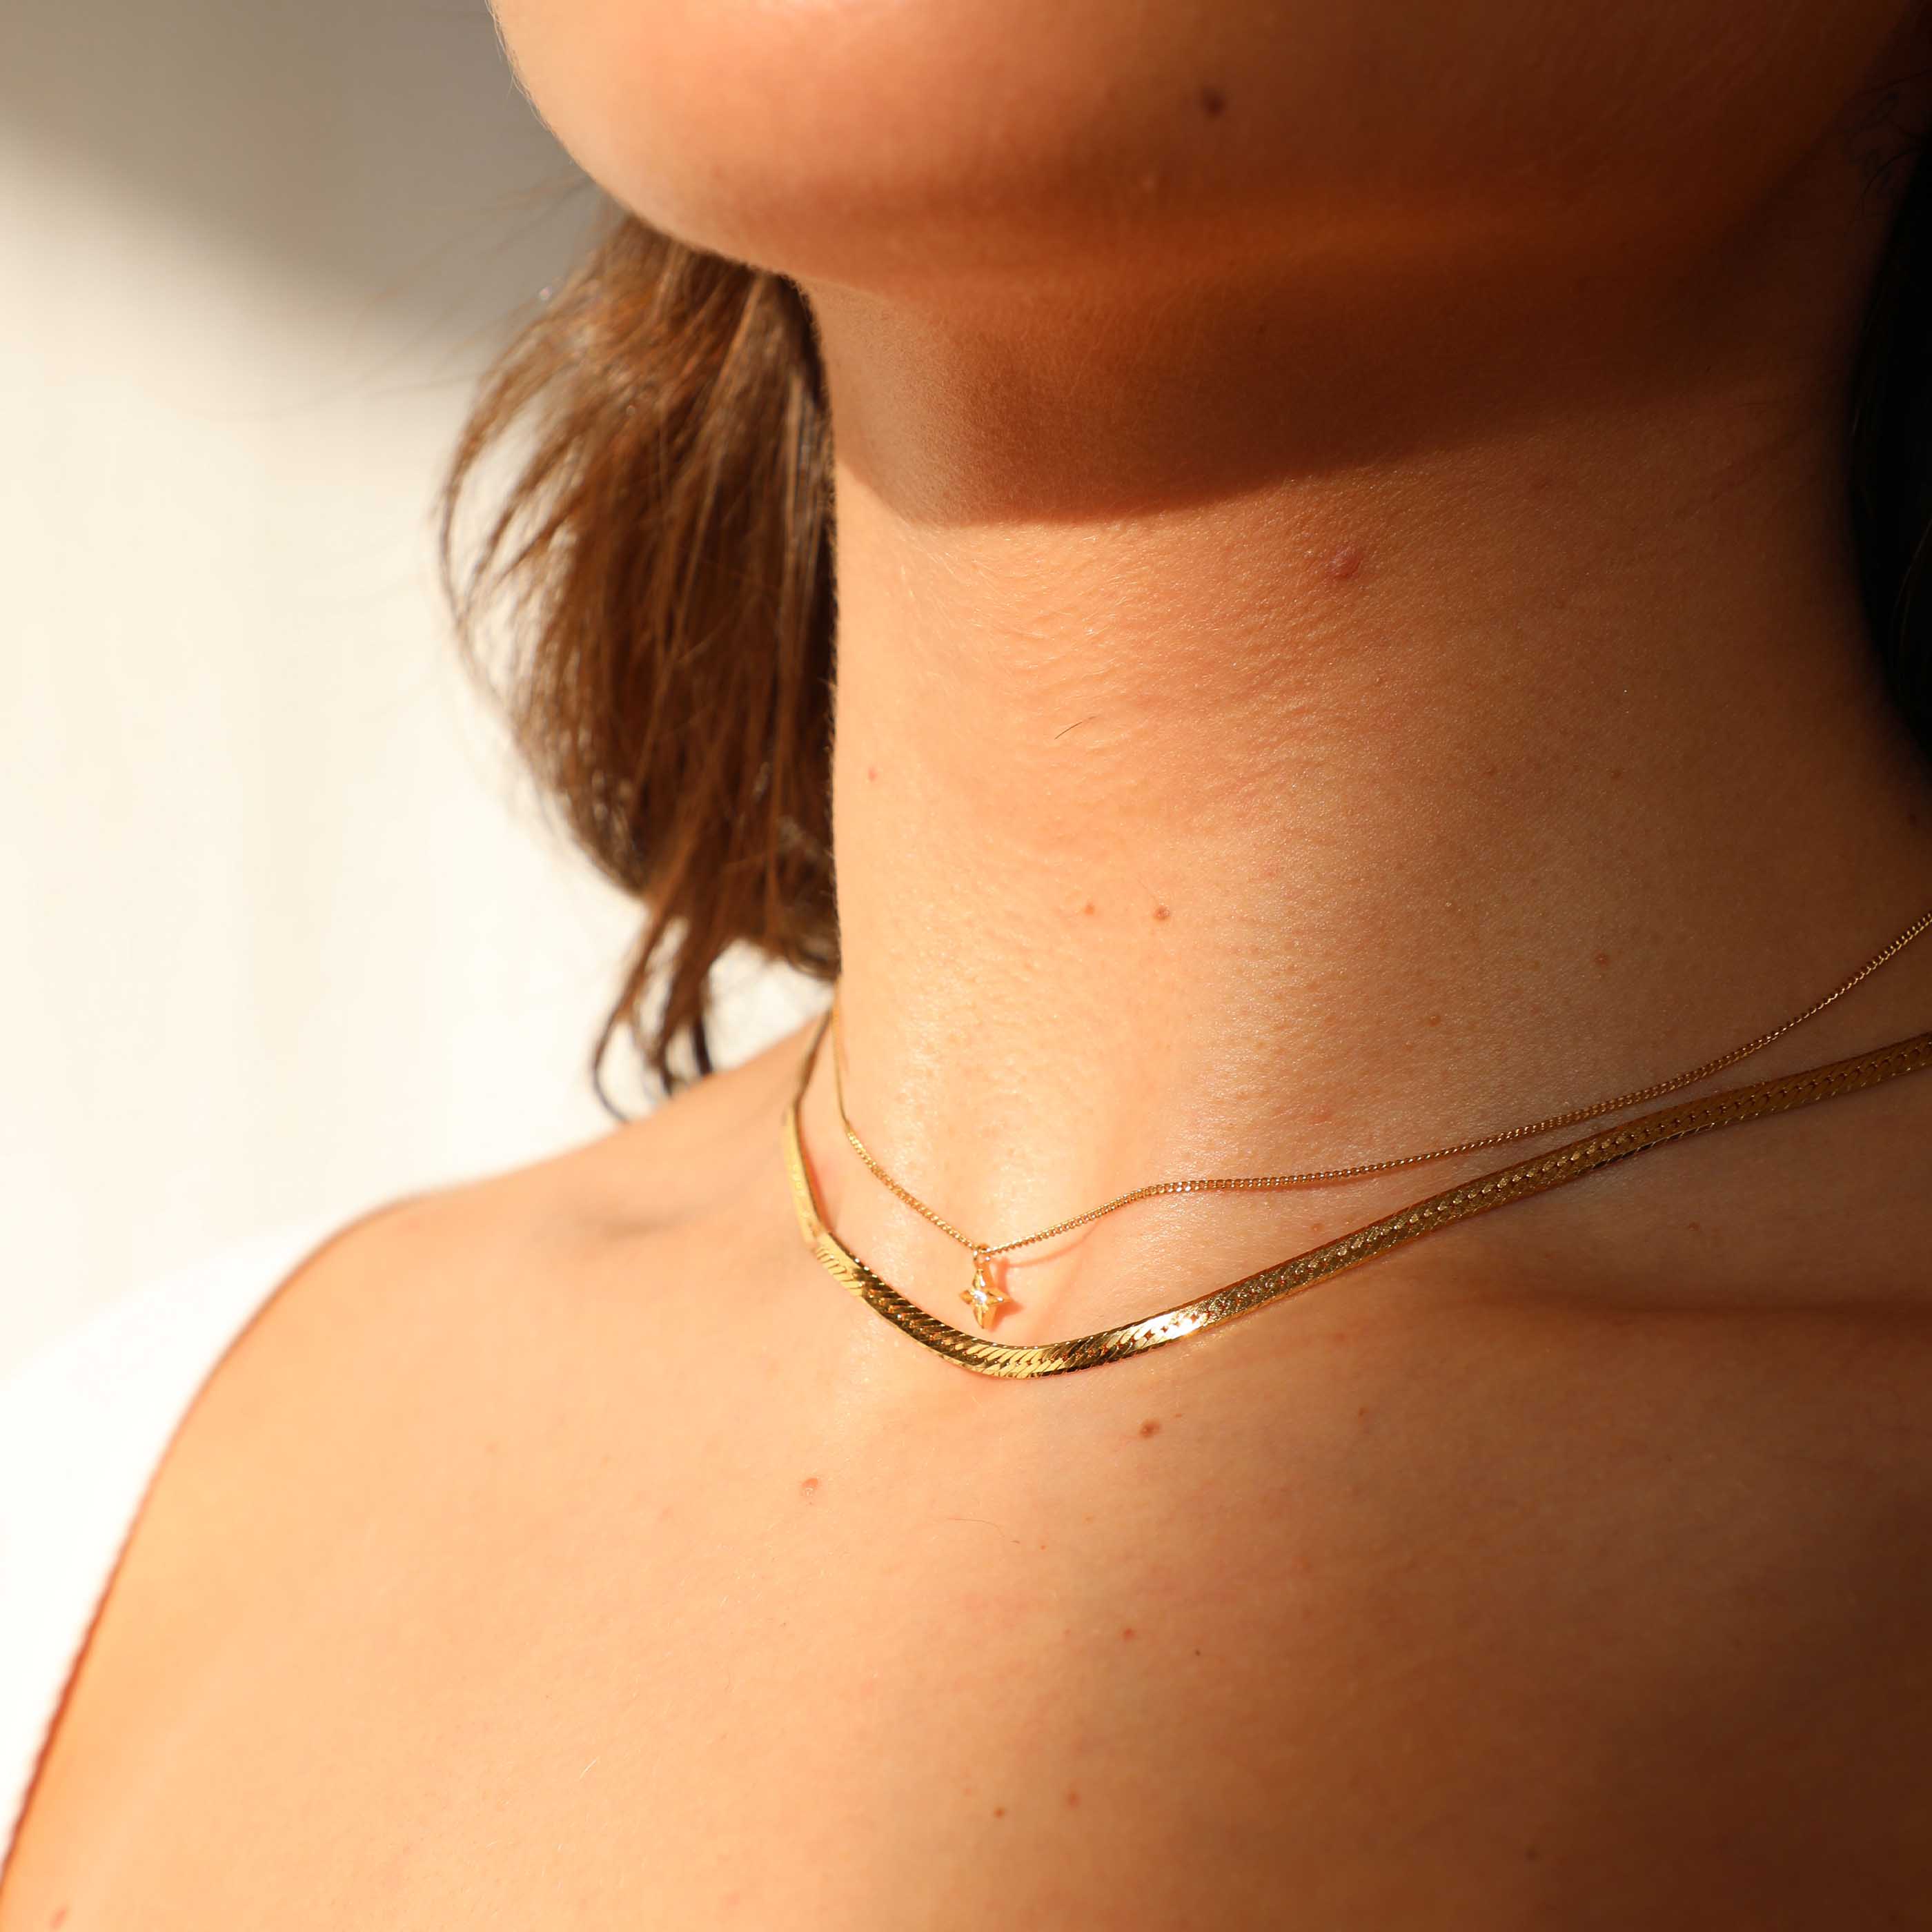 Gold snake chain worn with dainty pendant necklace